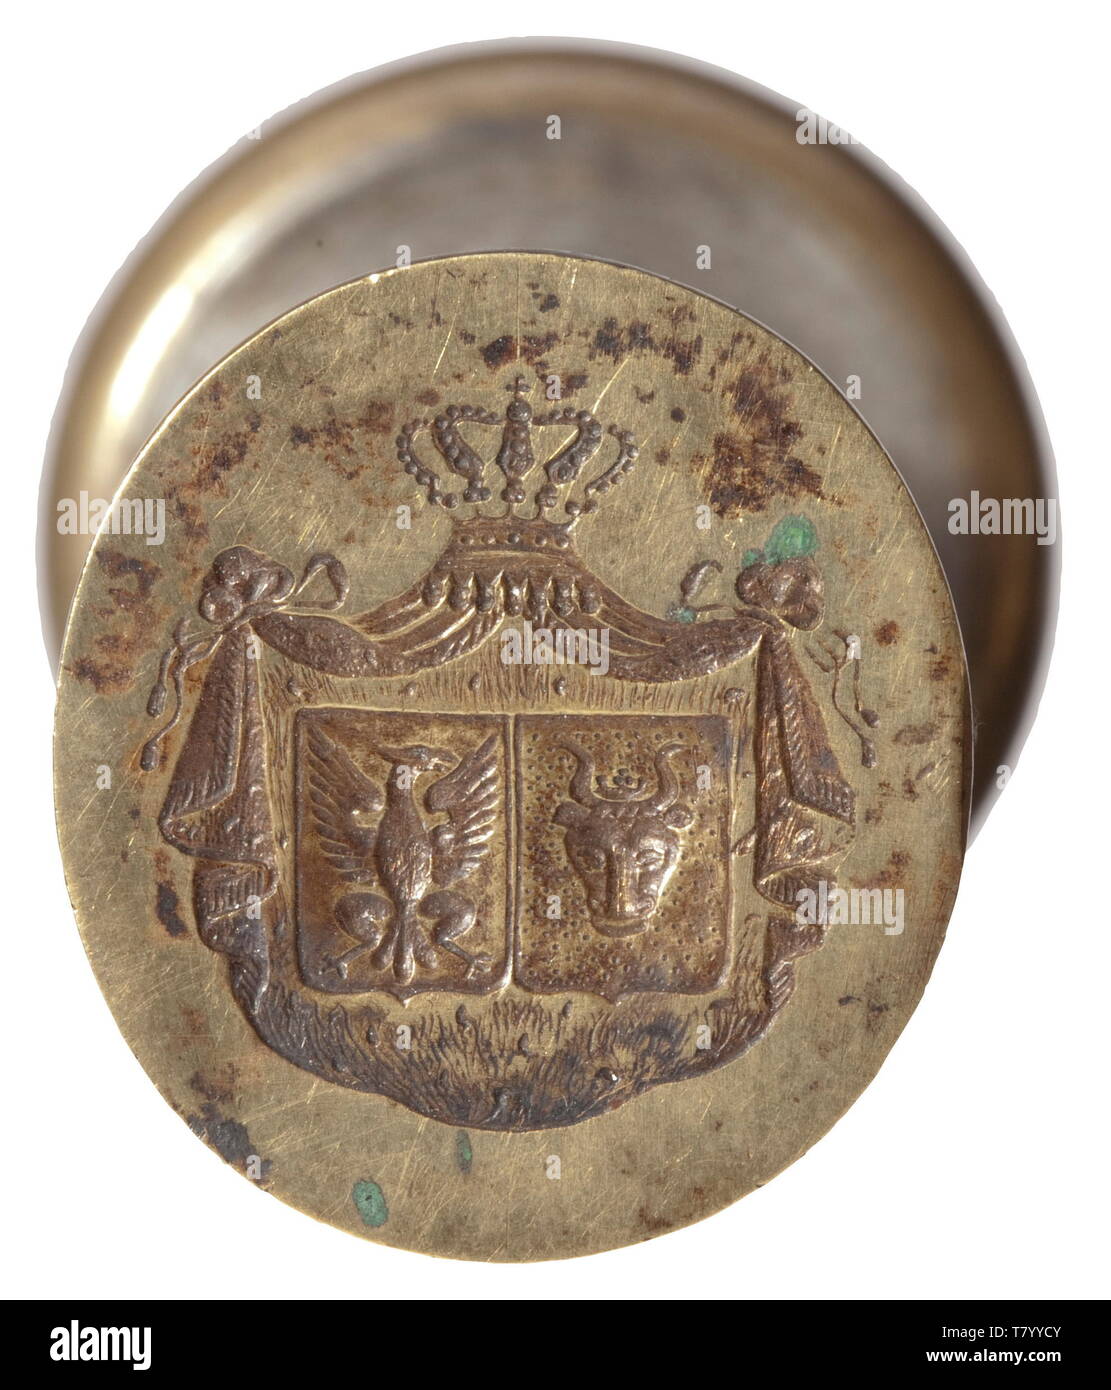 Adolf Friedrich von Mecklenburg-Strelitz (1819 - 1904) - his personal seal and family documents The seal made of brass, cut with the oval alliance coat of arms of the Grand Duke and his wife Elisabeth von Anhalt. Height 9.8 cm. Included are five hard cardboard photographs of the Grand Duke and his family, four cartes de visite and condolence cards of members of the Mecklenburg-Strelitz family (Adolf Friedrich, Johann Albrecht, Georg Alexander and Paul, Duke of Mecklenburg) and documentation on the obsequies for His Royal Highness Friedrich Wilhel, Additional-Rights-Clearance-Info-Not-Available Stock Photo